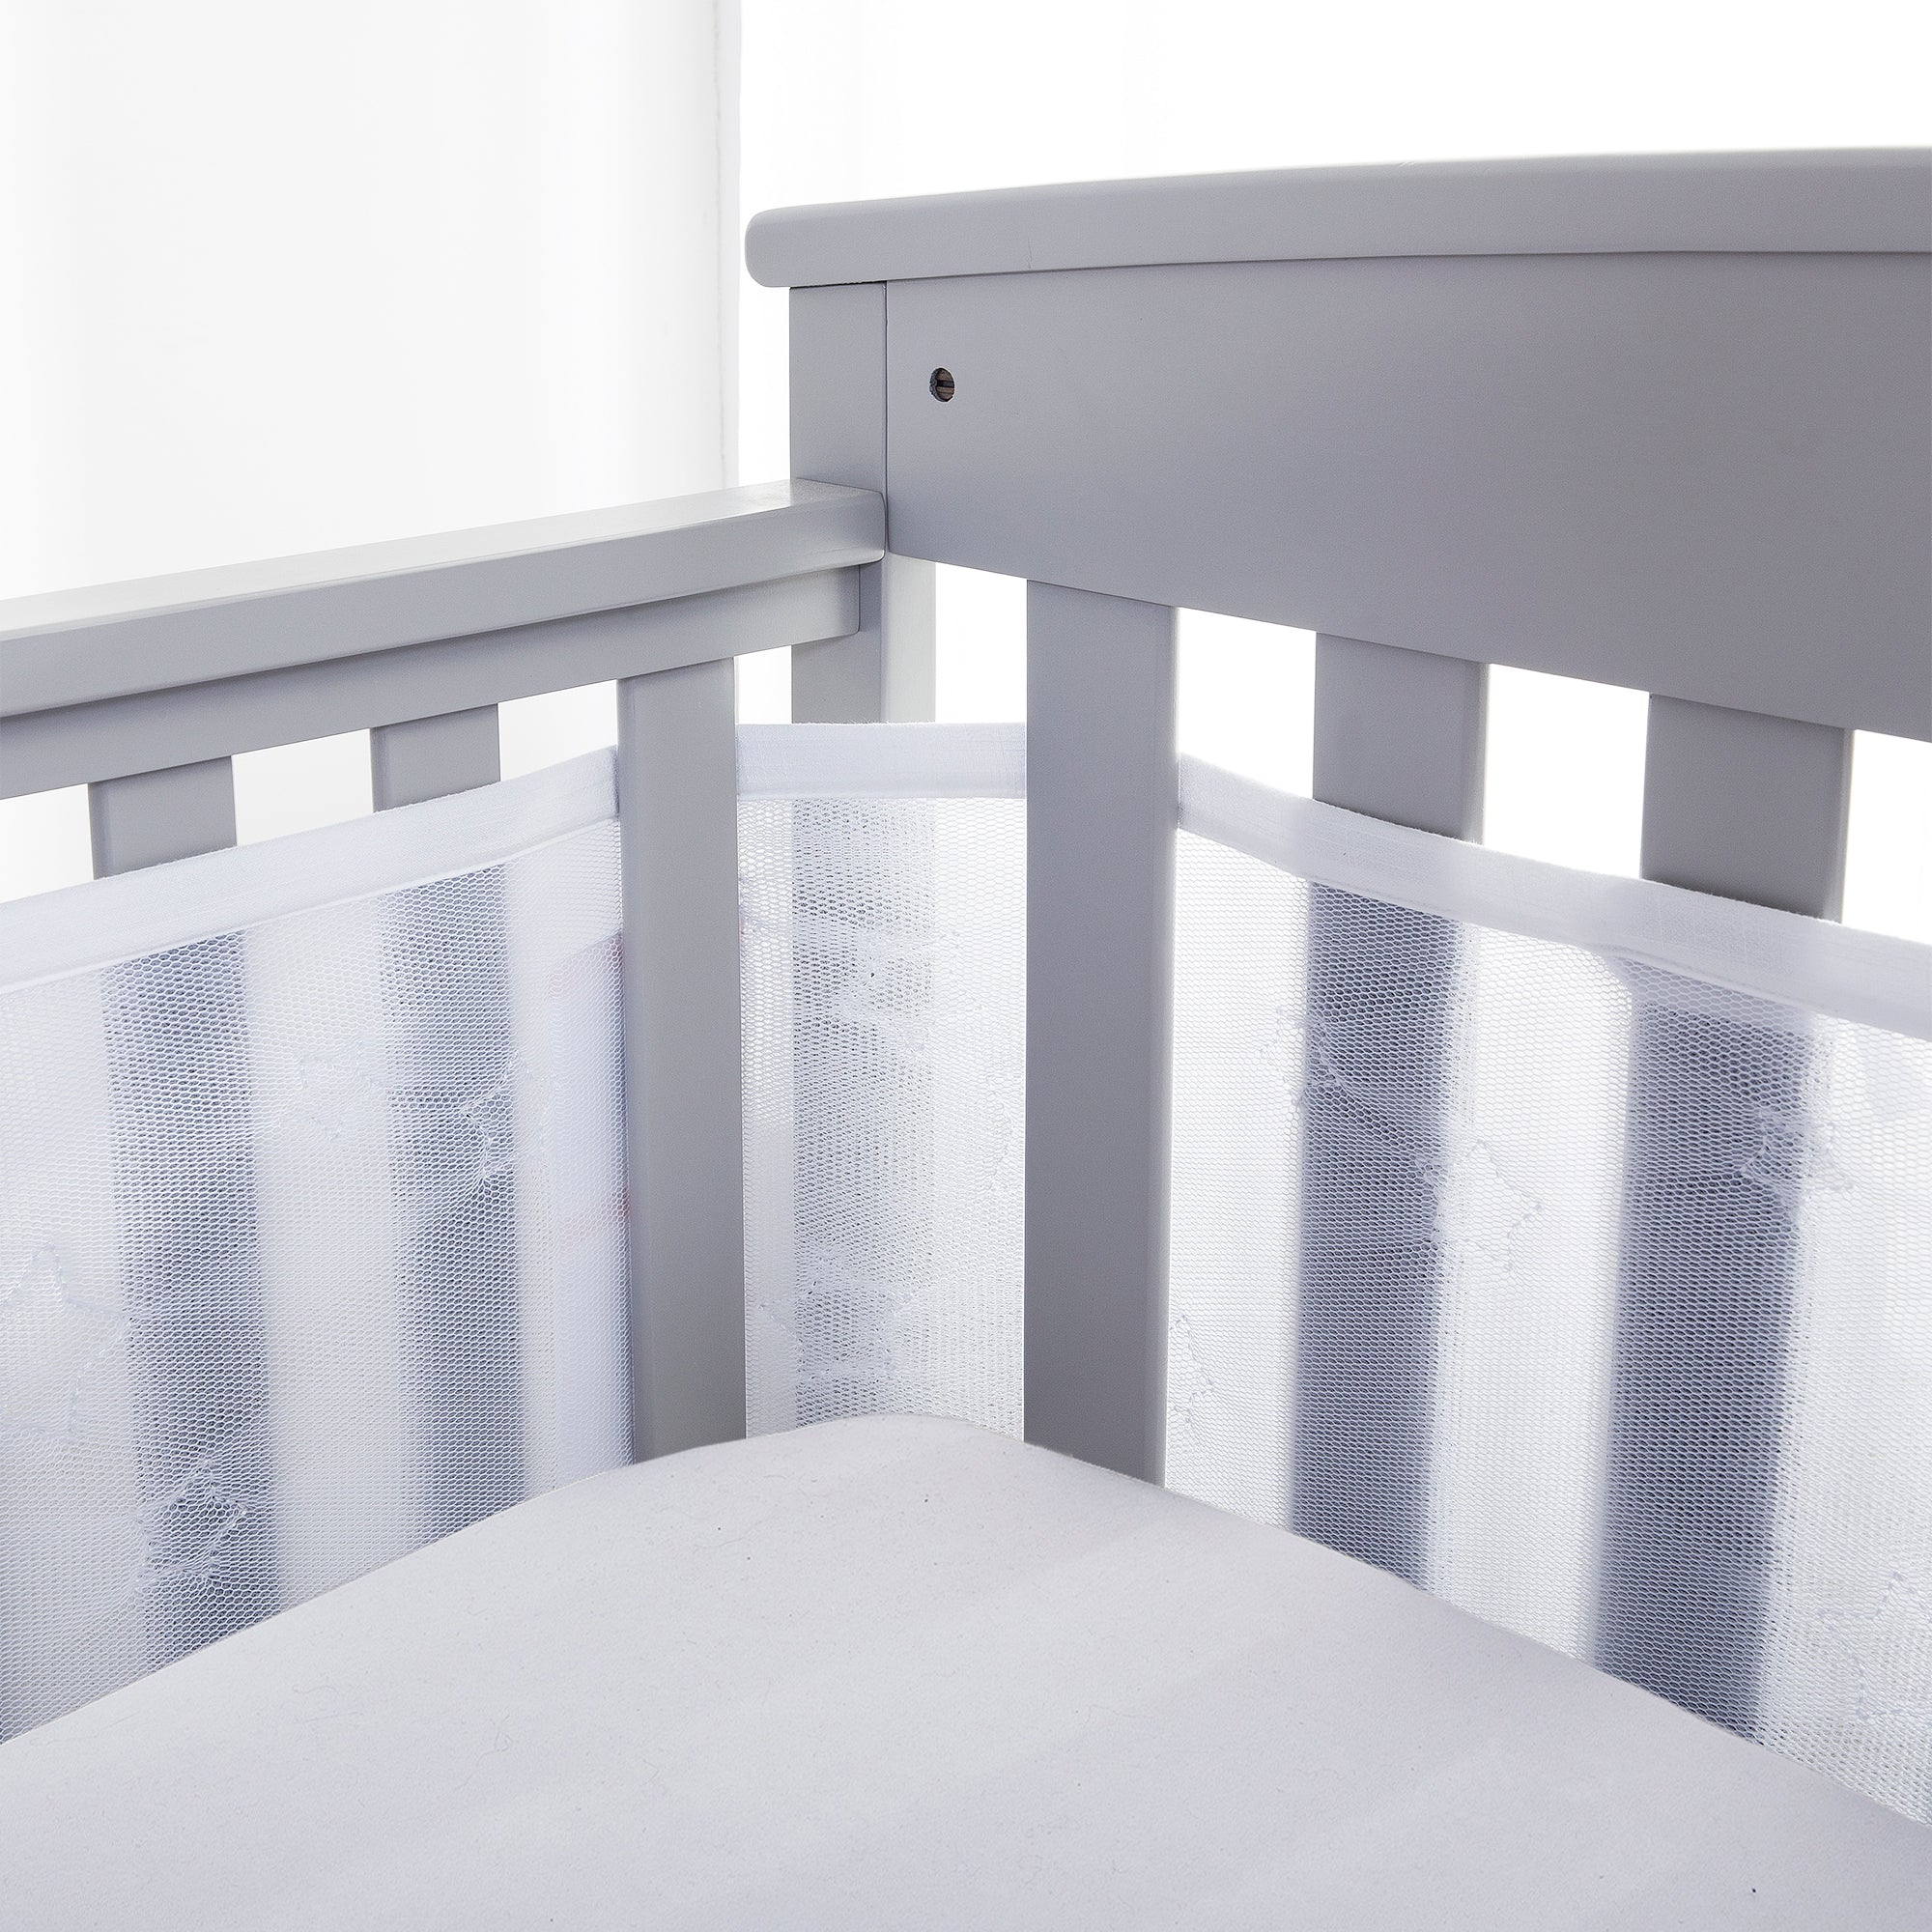 BreathableBaby, Deluxe Breathable Mesh Crib Liner